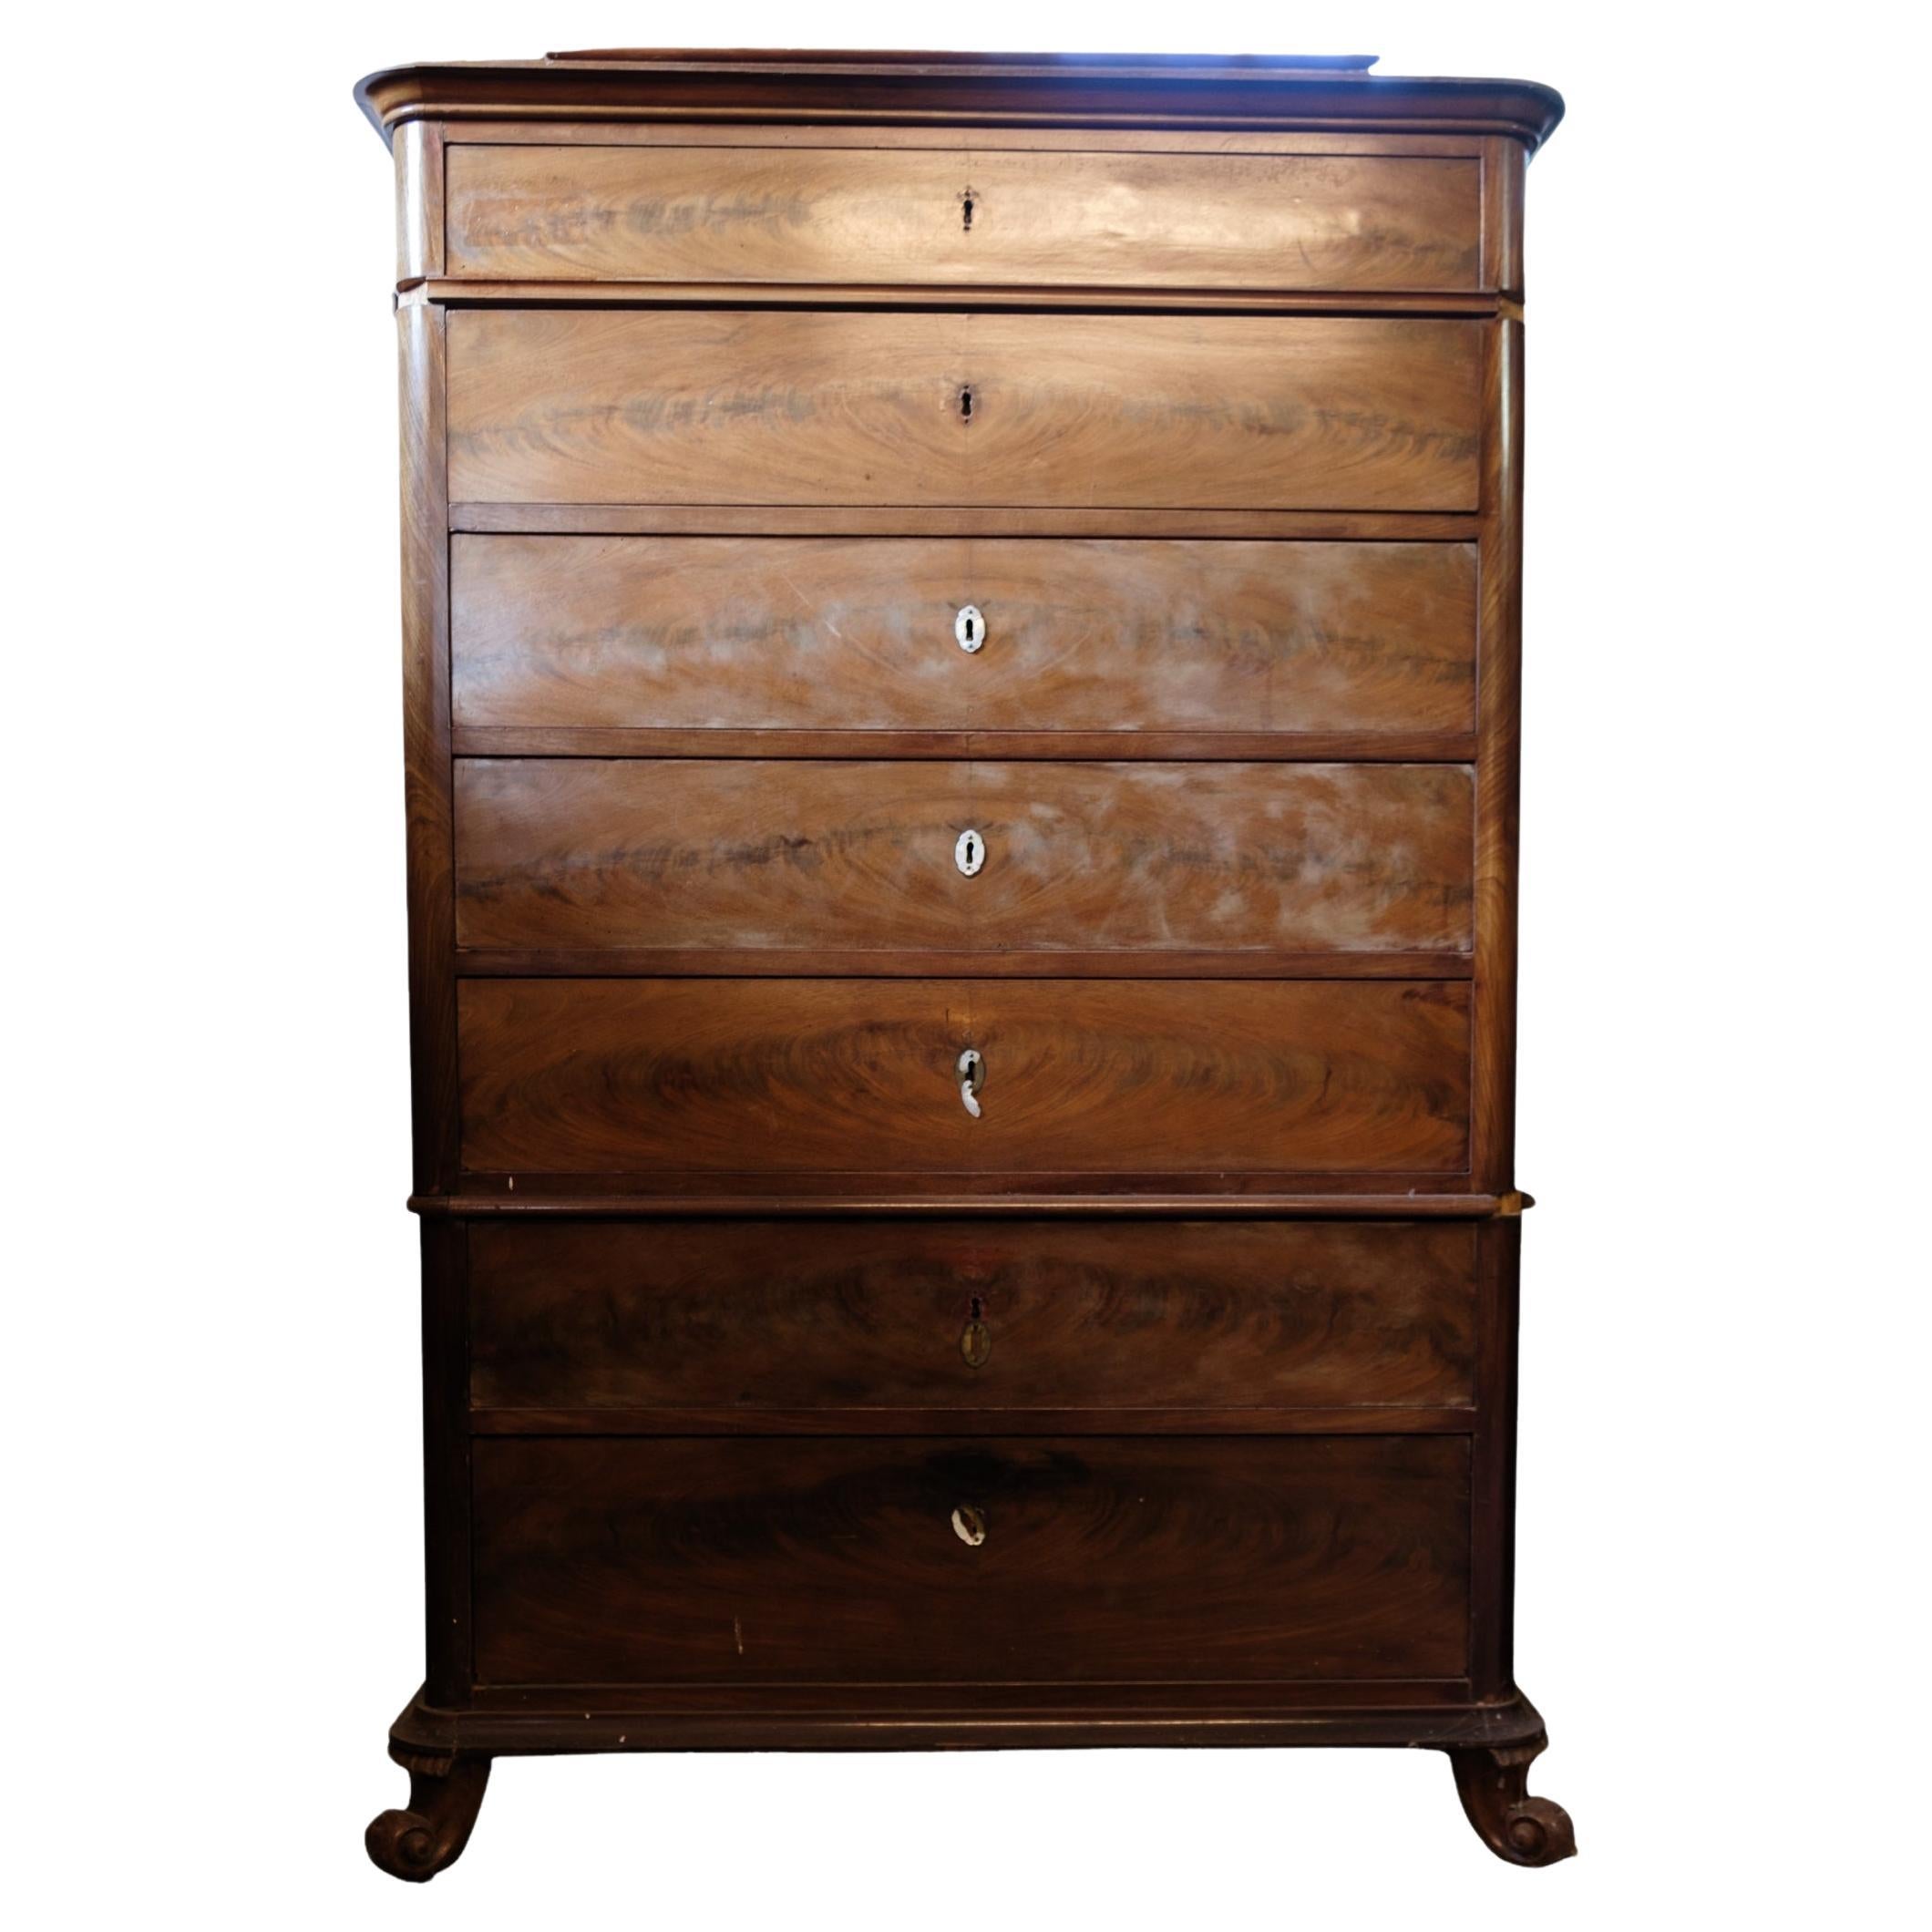 High mahogany chest of drawers from around the 1840s For Sale